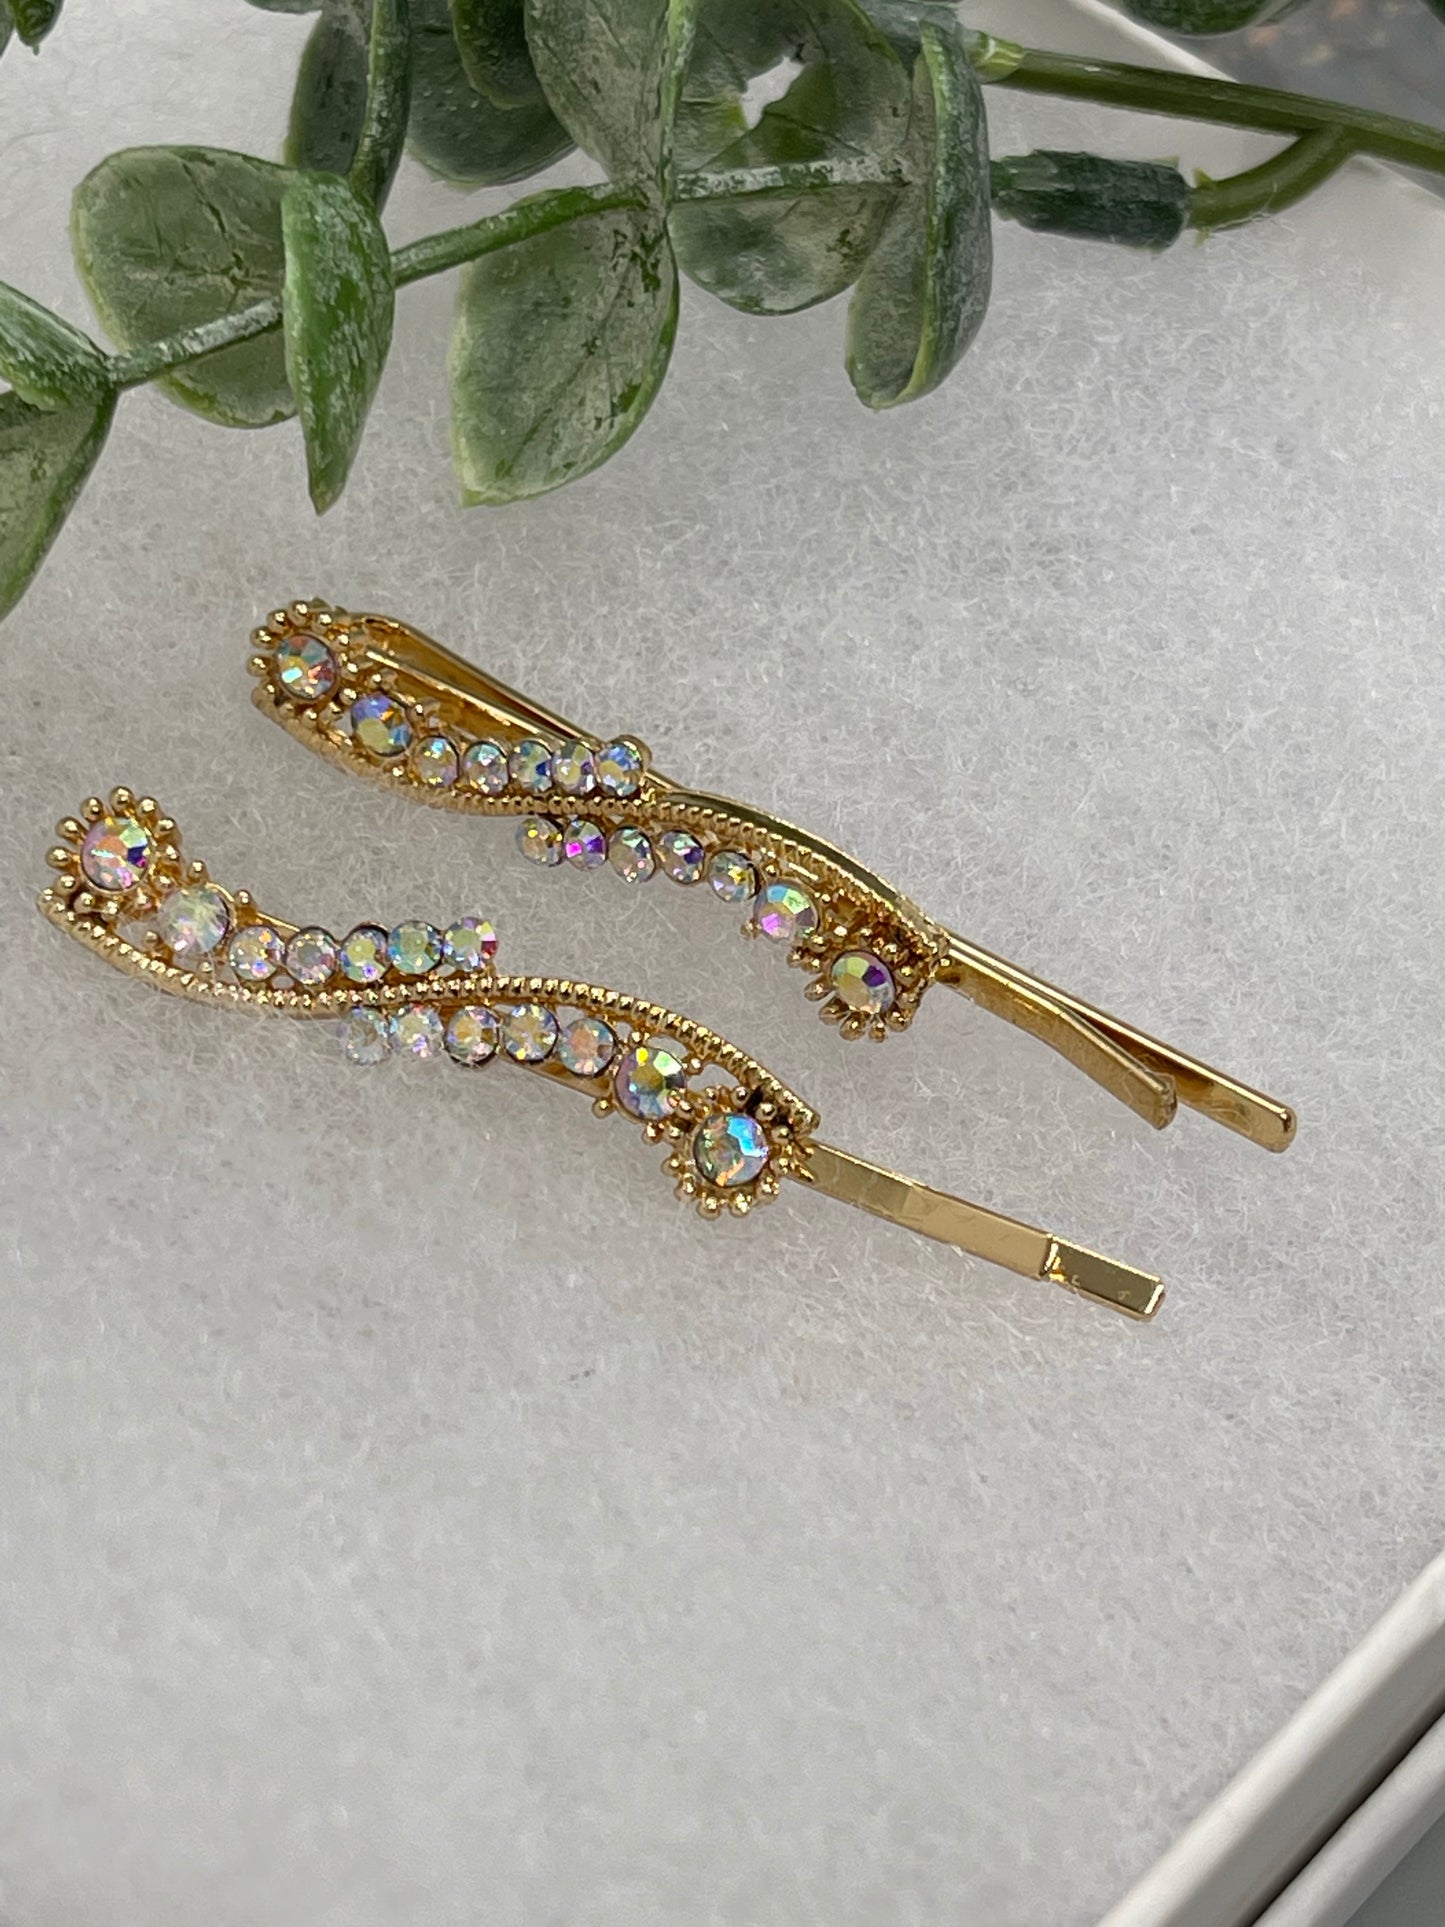 Iridescent crystal rhinestone approximately 2.0” gold tone hair pins 2 pc set wedding bridal shower engagement formal princess accessory accessories